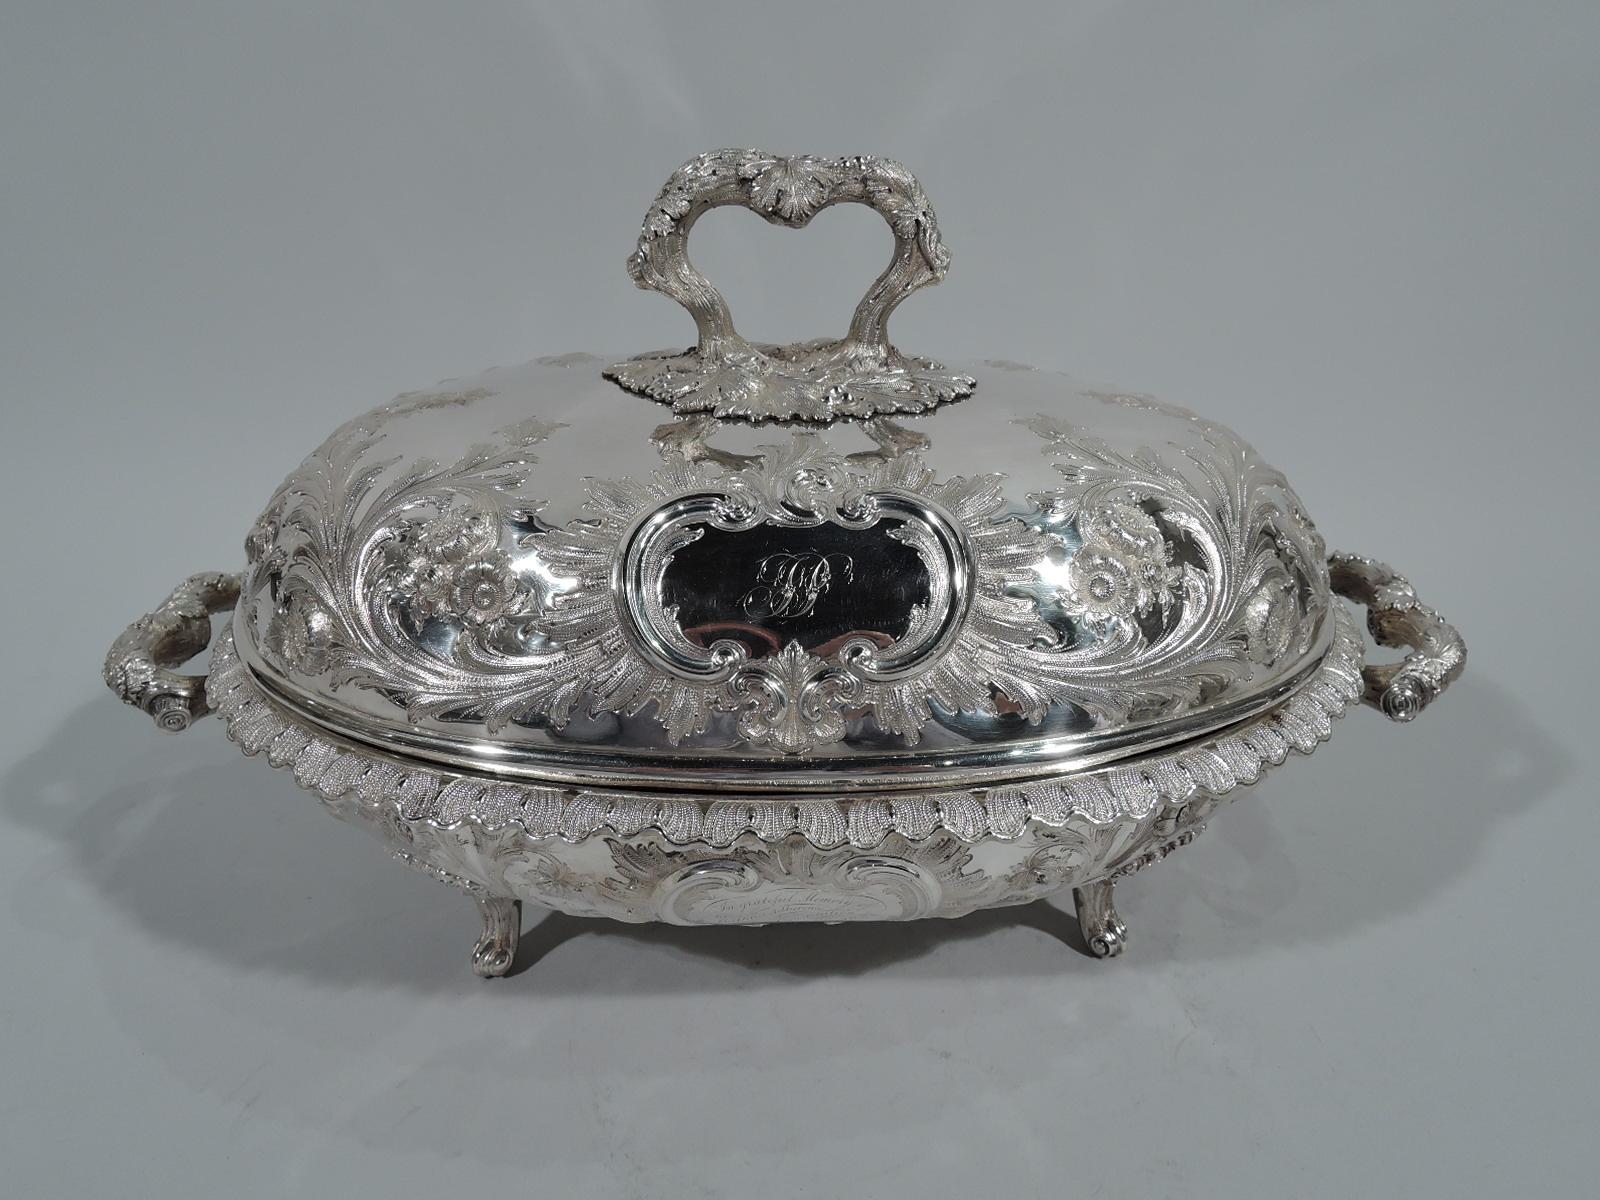 Of presidential interest – Covered sterling silver serving dish. Made by Bailey & Co. in Philadelphia. Ovoid bowl with turned-down and scalloped leaf rim, scrolled leaf-wrapped branch handles, and 4 leaf-mounted volute-scroll supports. Domed cover